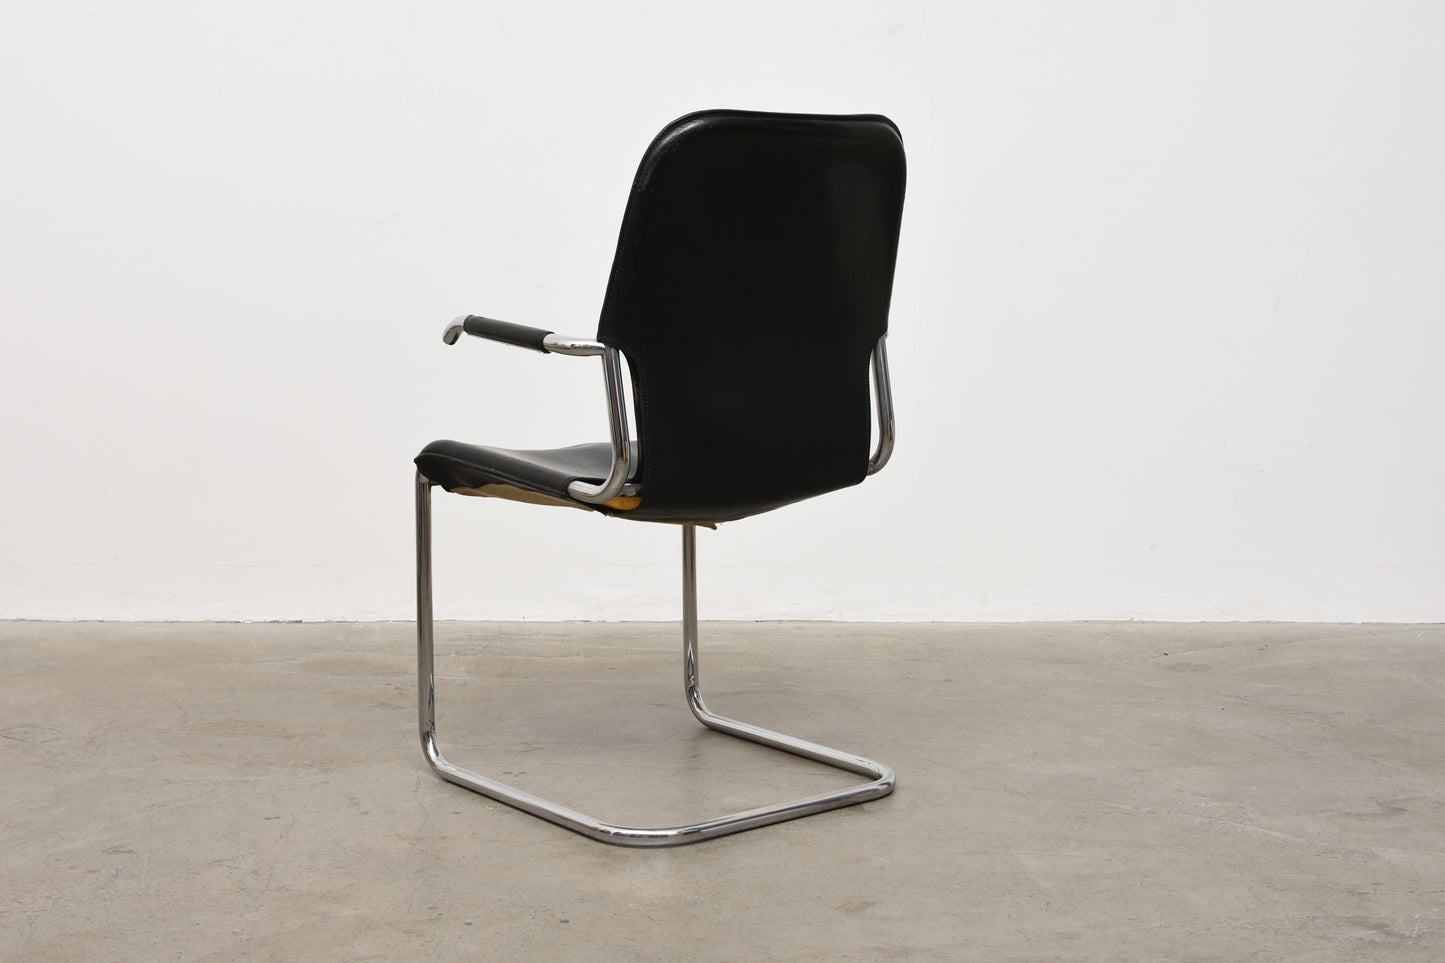 1980s leather + steel chair by Kenneth Bergenblad